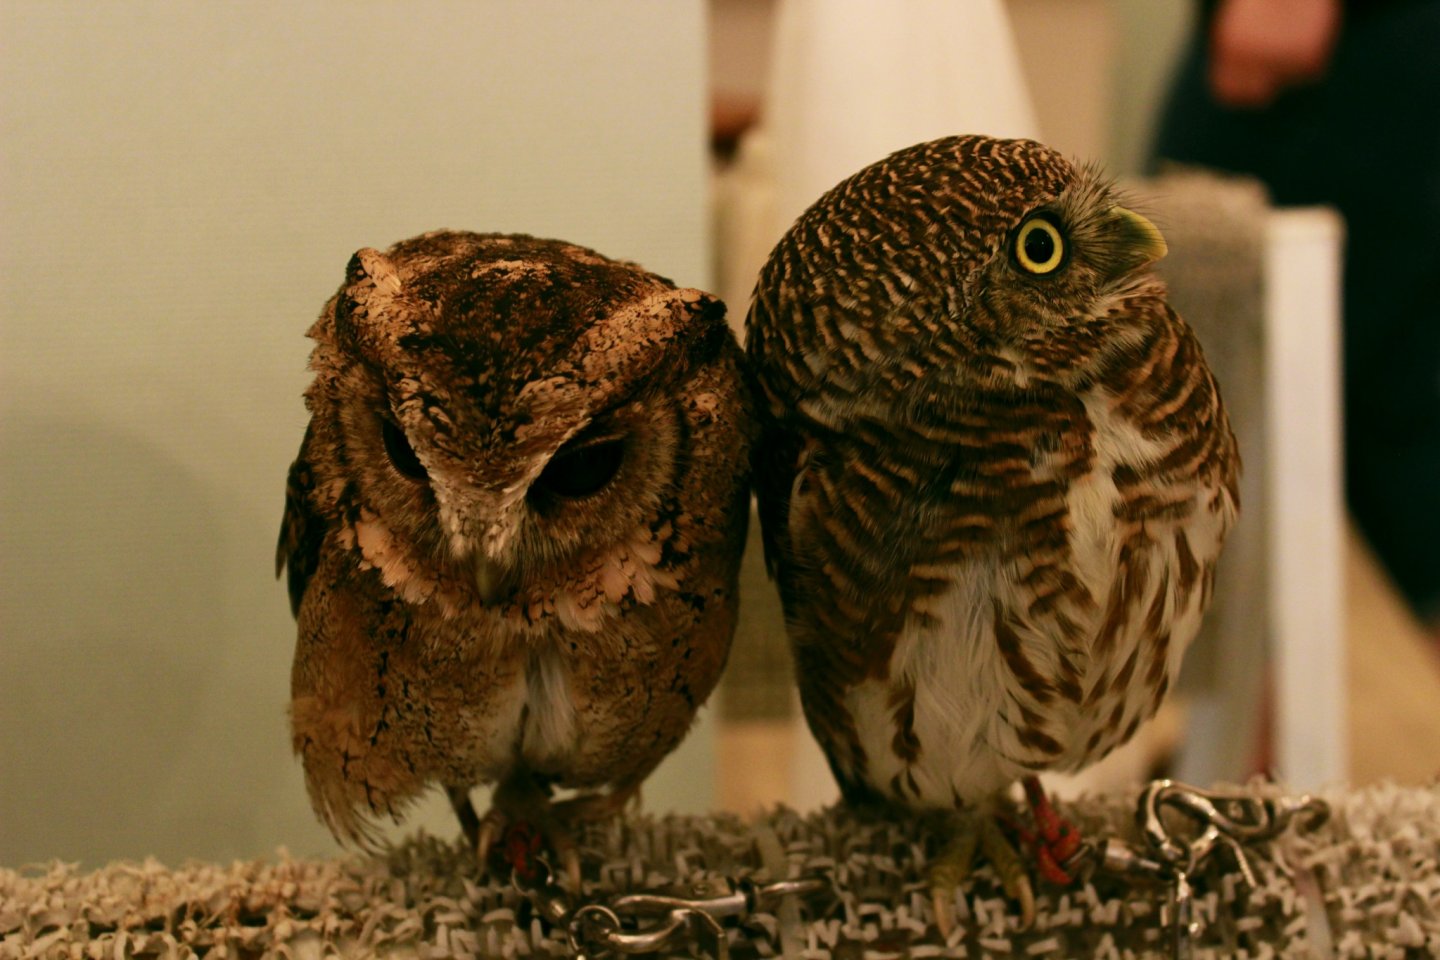 Some of the owls are just the size of your fist.